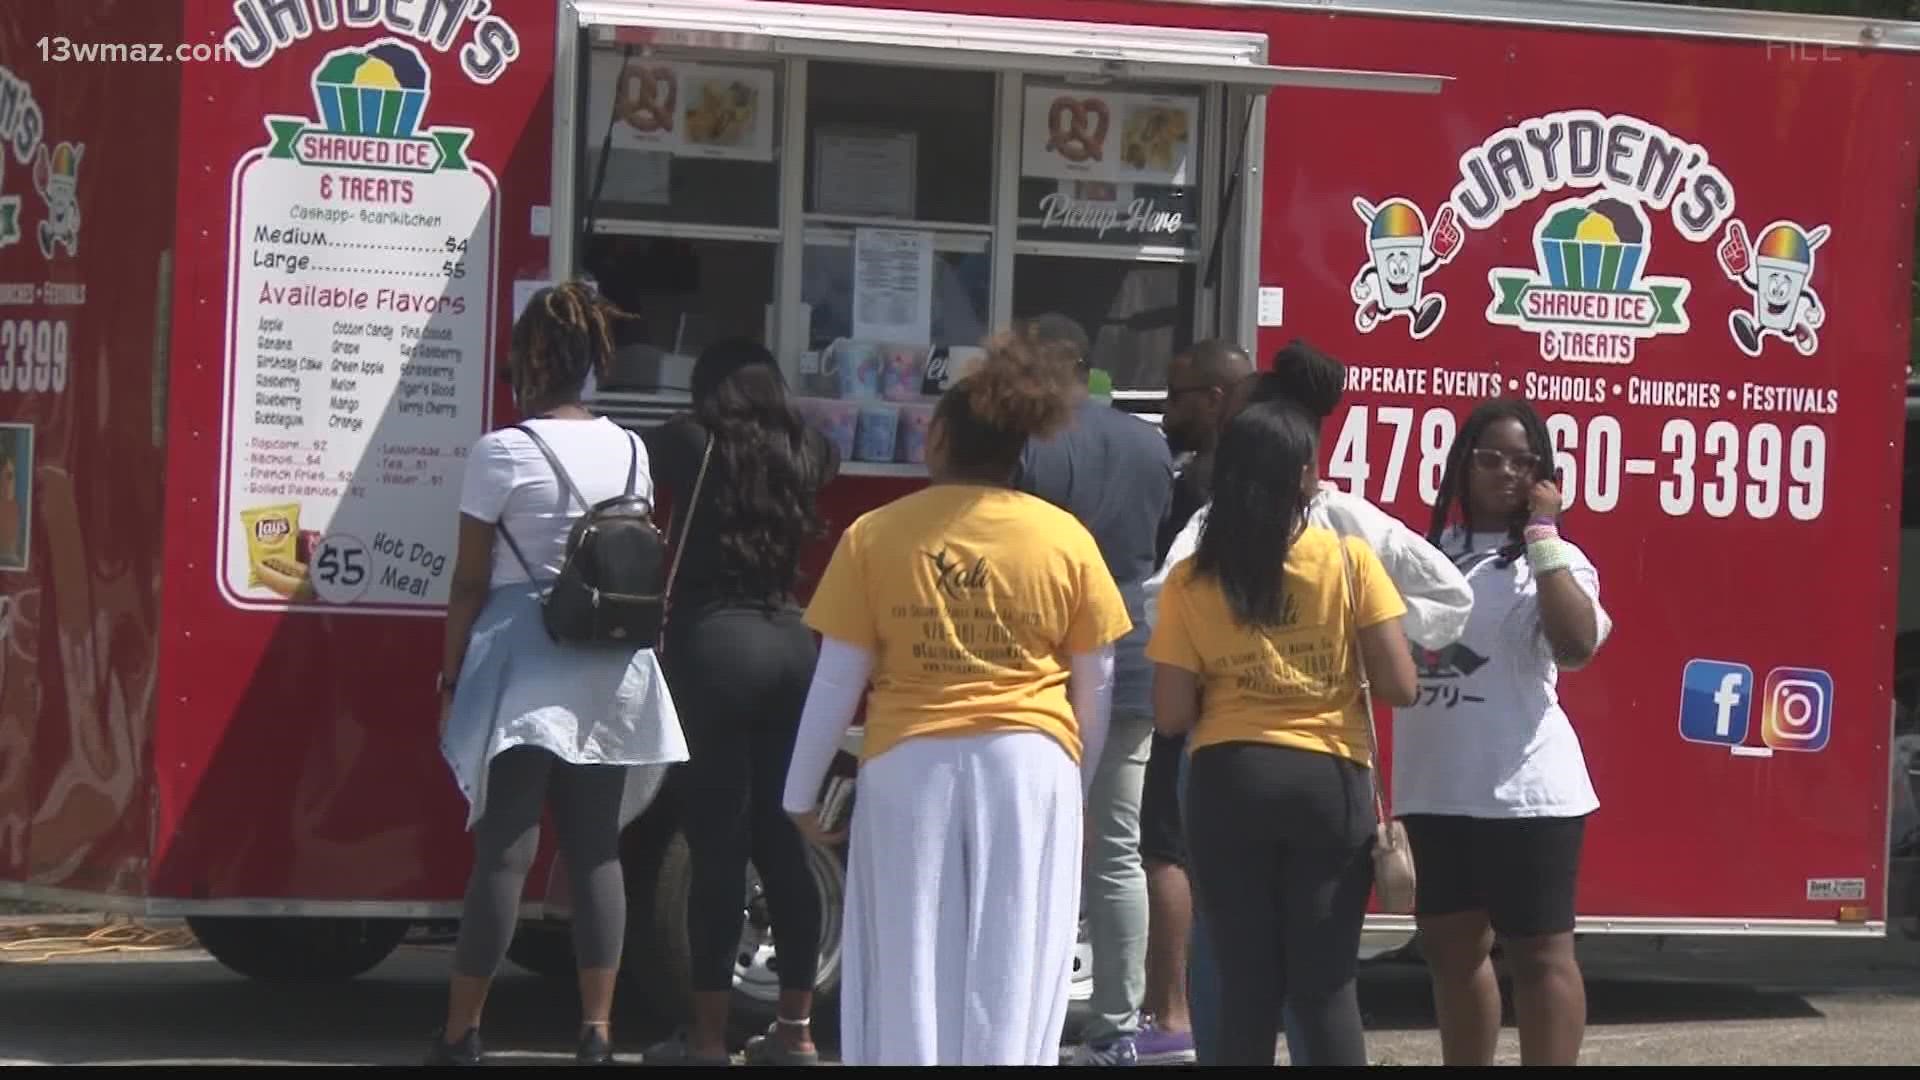 The City of Warner Robins is waiving food-truck fees for one event, next week's Independence Day Concert.